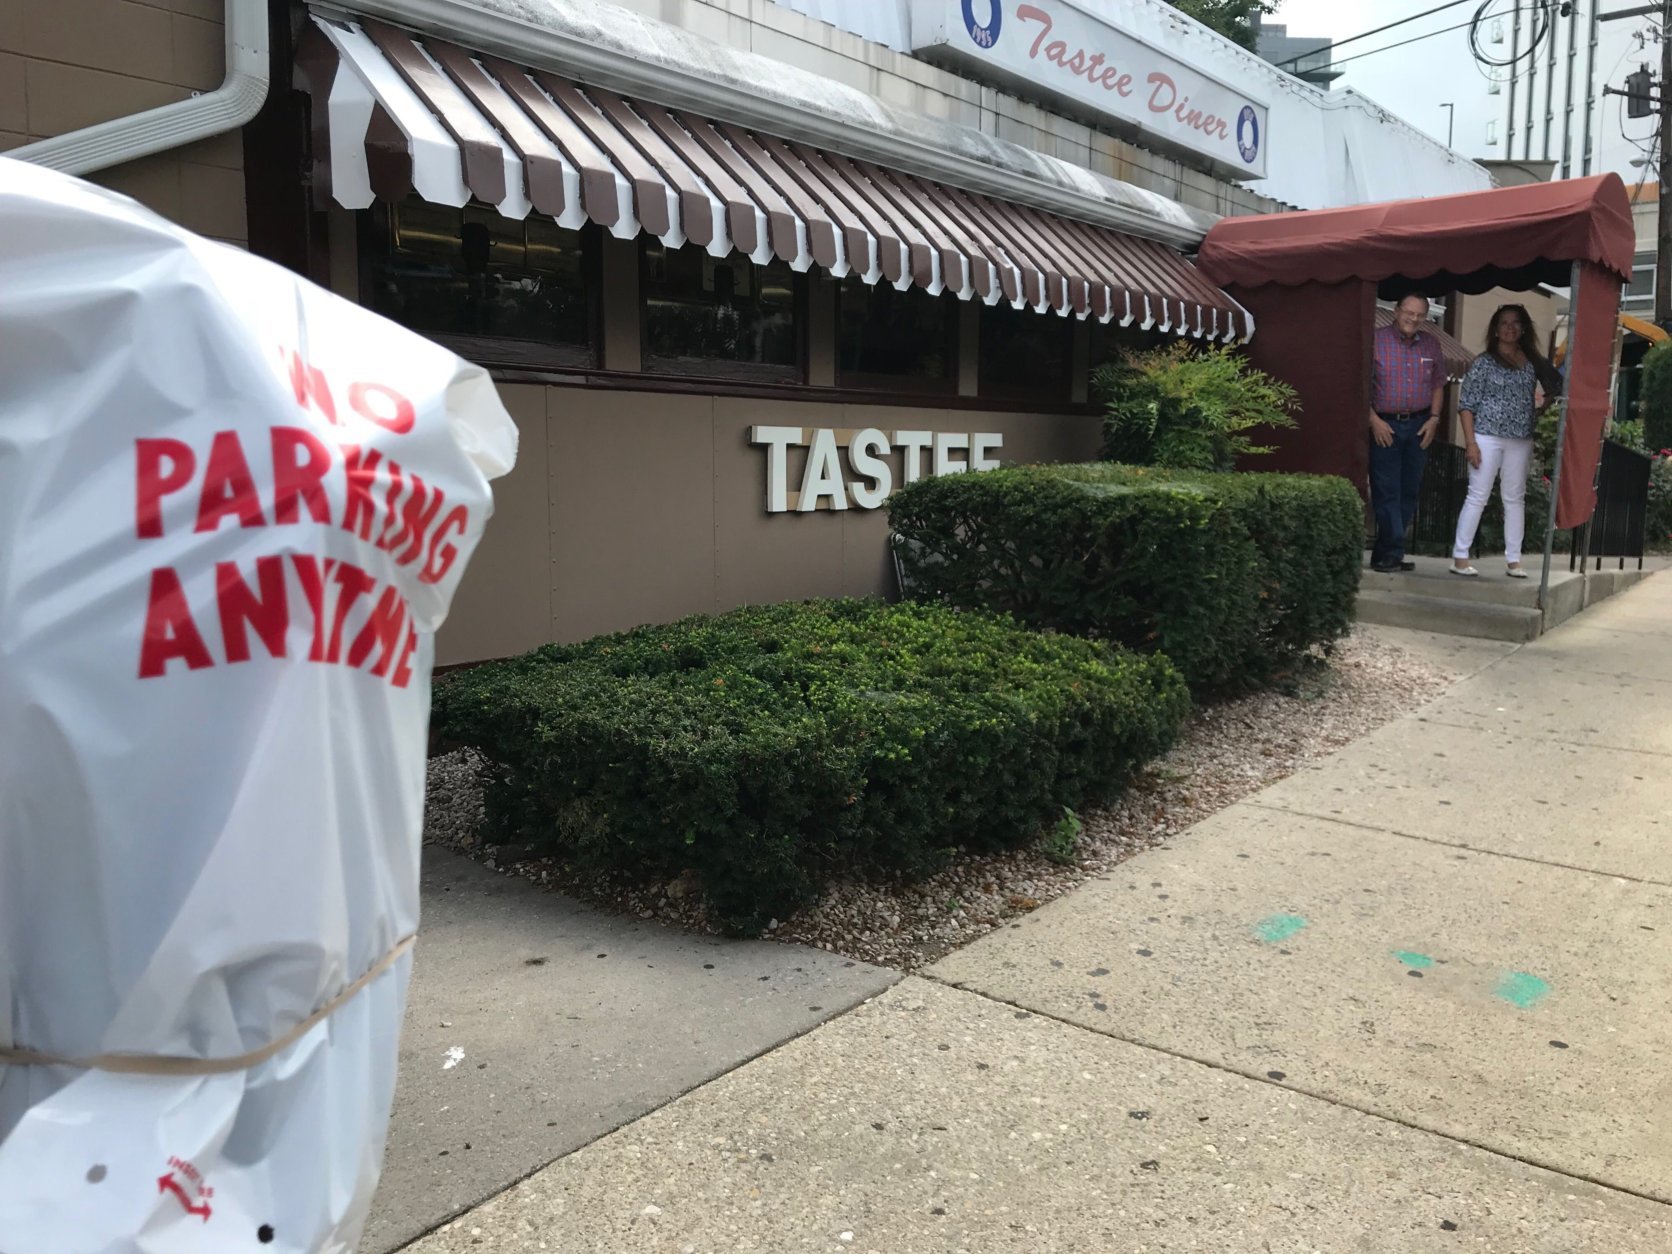 Tastee Diner in Bethesda, Maryland, still serves up eggs, pancakes and grilled pork chops, but construction of the nearby new Marriott headquarters and the accompanying loss of parking spaces have dramatically hurt sales. (WTOP/Dick Uliano)